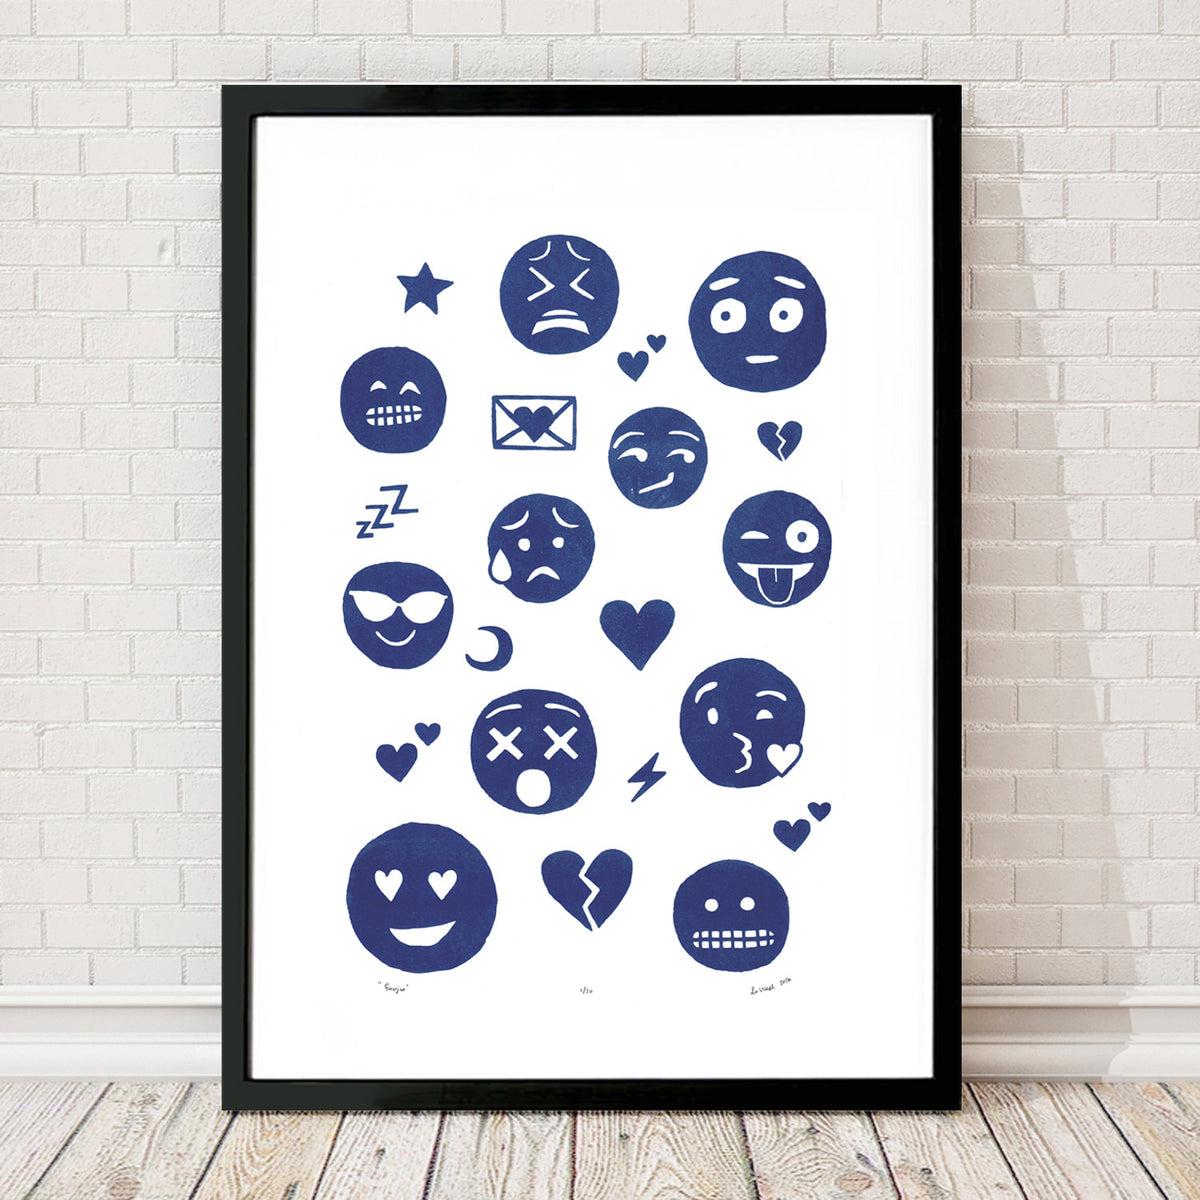 A playfully illustrated graphic print featuring your favourite emojis. This quirky, one-of-a-kind art print will make a witty conversation piece in your home.